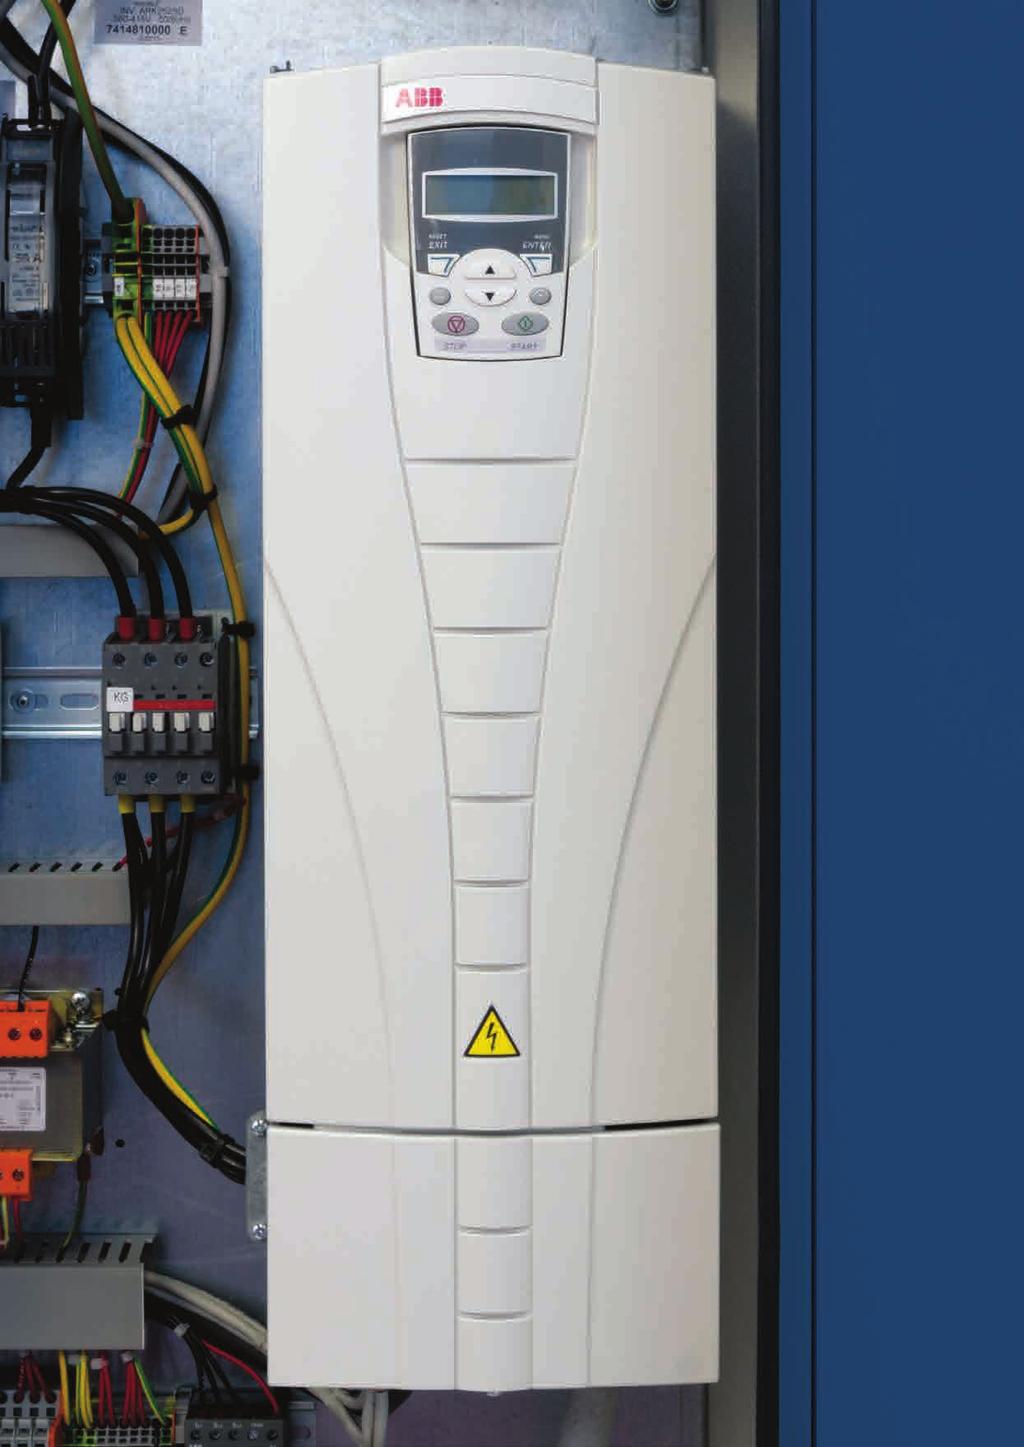 nverter Choose quality with efficient ABB VSD control system.